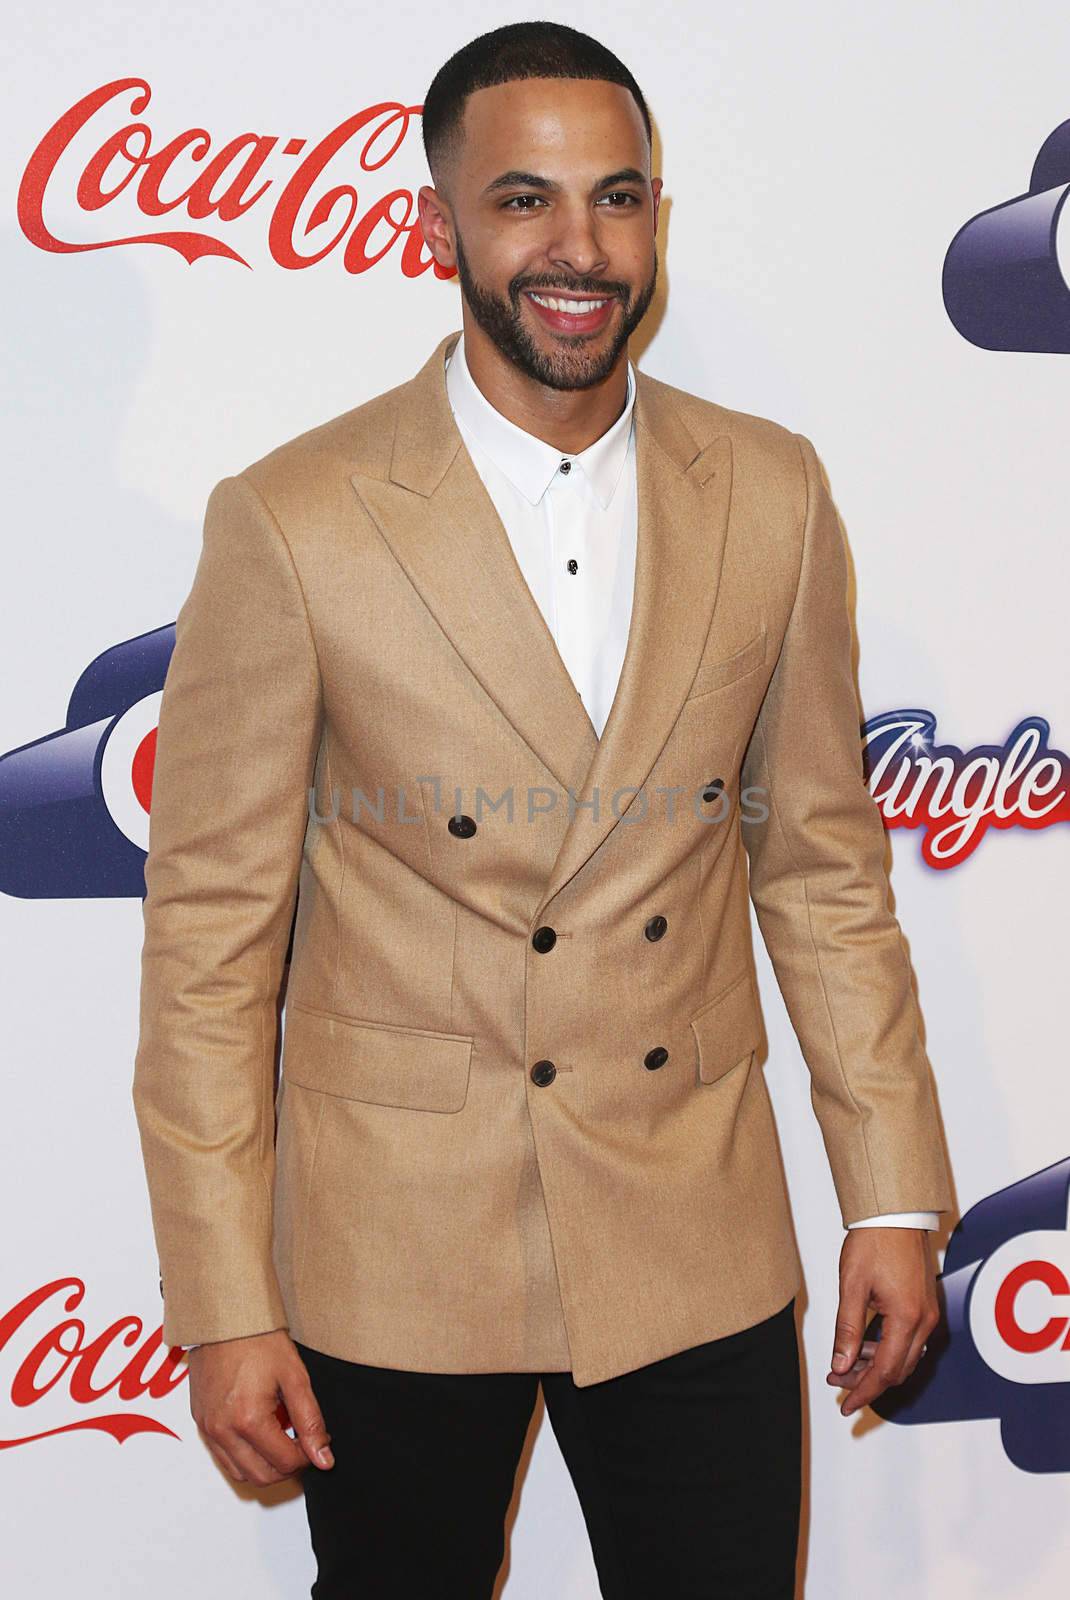 UNITED KINGDOM, London: Marvin Humes arrives to the O2 stadium ahead of Capital's Jingle Bell Ball on December 5, 2015.  The event shares a portion of the ticket sales profit with Global's Make Some Noise charity.  Stars in the photos include: David Guetta, F leur East, Jason Derulo,  Katy B, Marvin Humes, Nathan Sykes, Tinie Tempah, WSTRN, and Years and Years.      